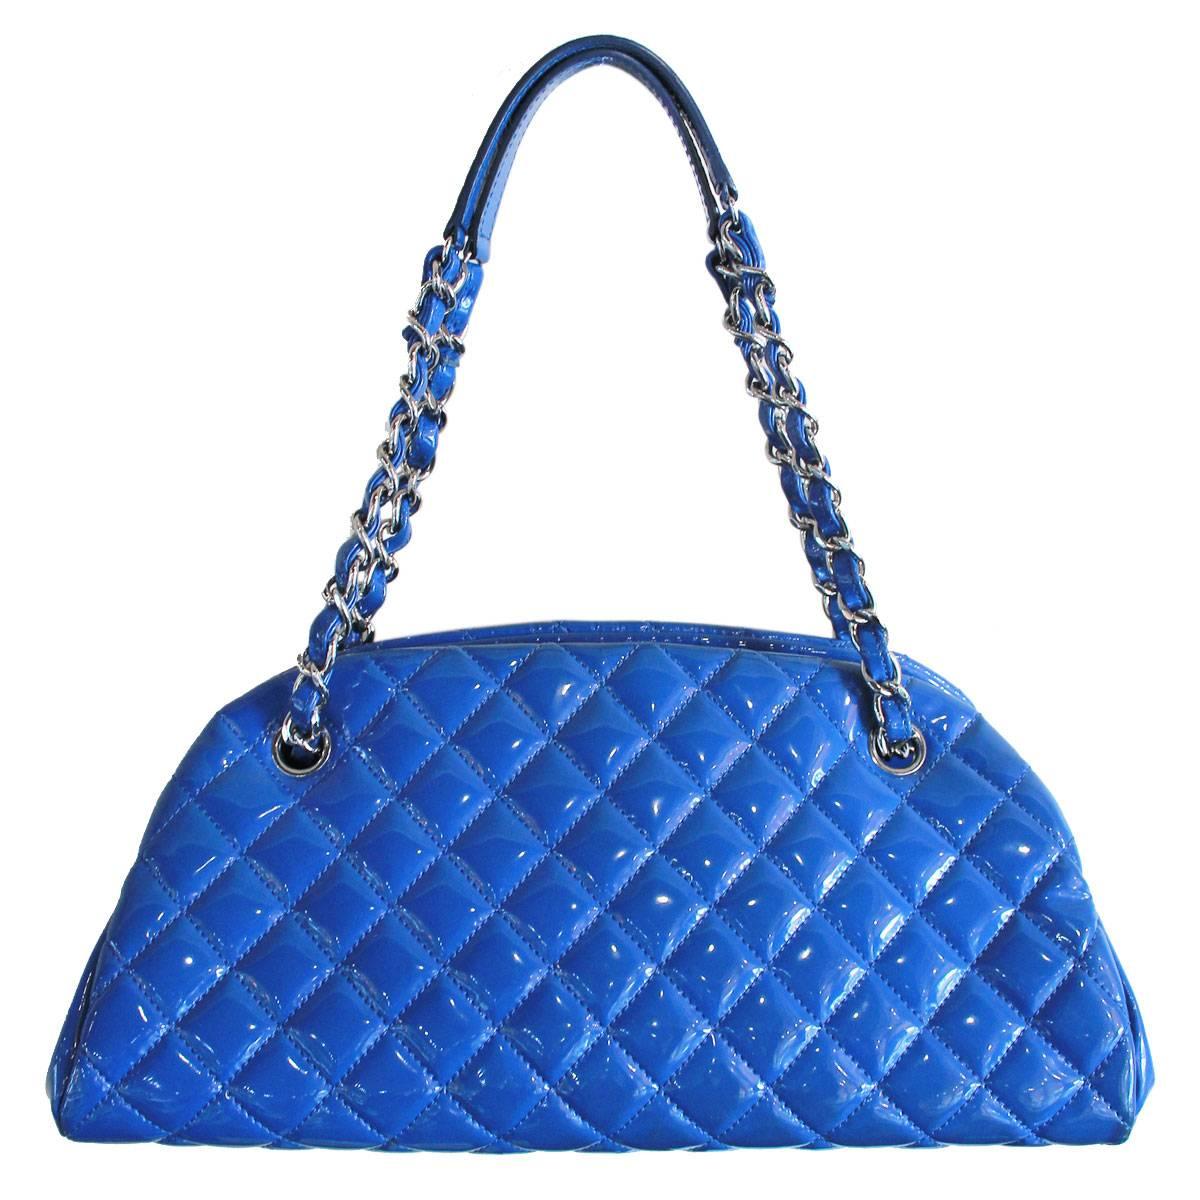 Company: Chanel
Style: Bowler Bag
Handles: Electric Blue Leather Intertwined in Silver Tone Chain Handles; Drop: 7.5